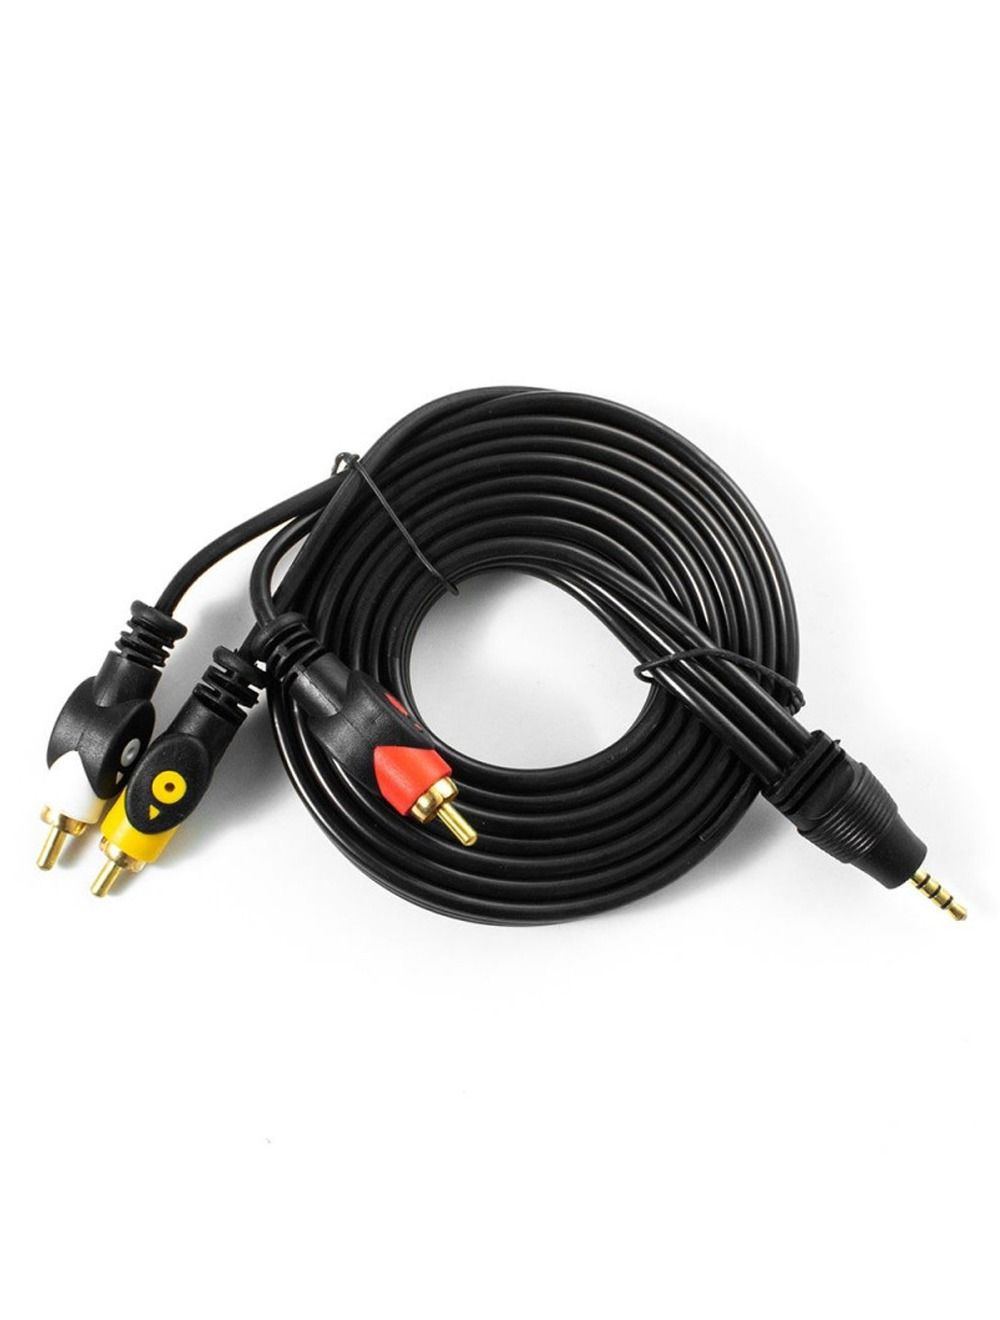 Car Audio Cables - 3.5mm Panel Mount to Dual RCA Cable